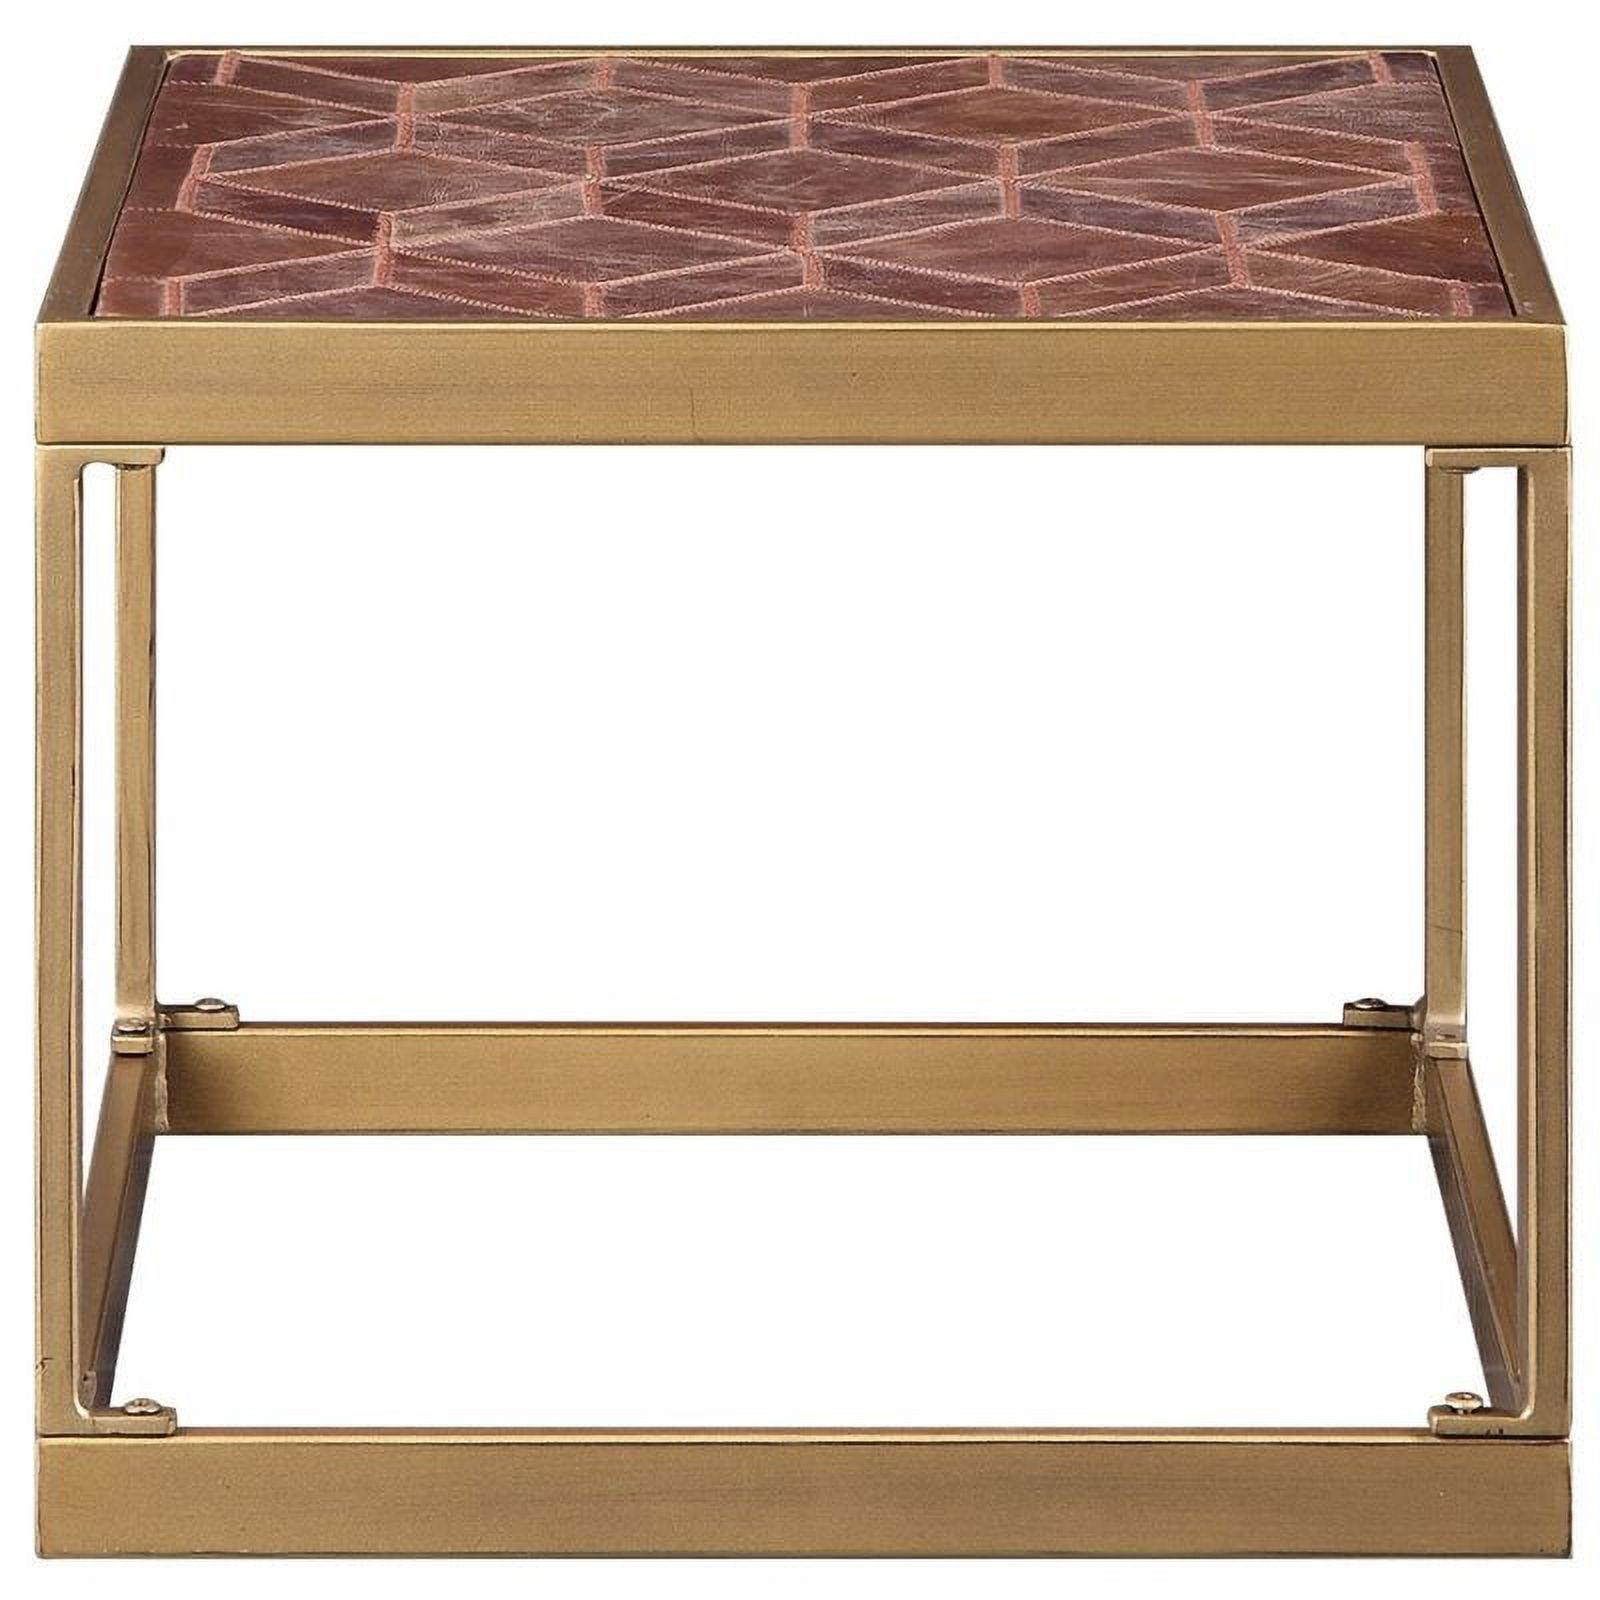 ACME Genevieve Rectangular Metal Frame End Table in Retro Brown and Brass - image 4 of 5